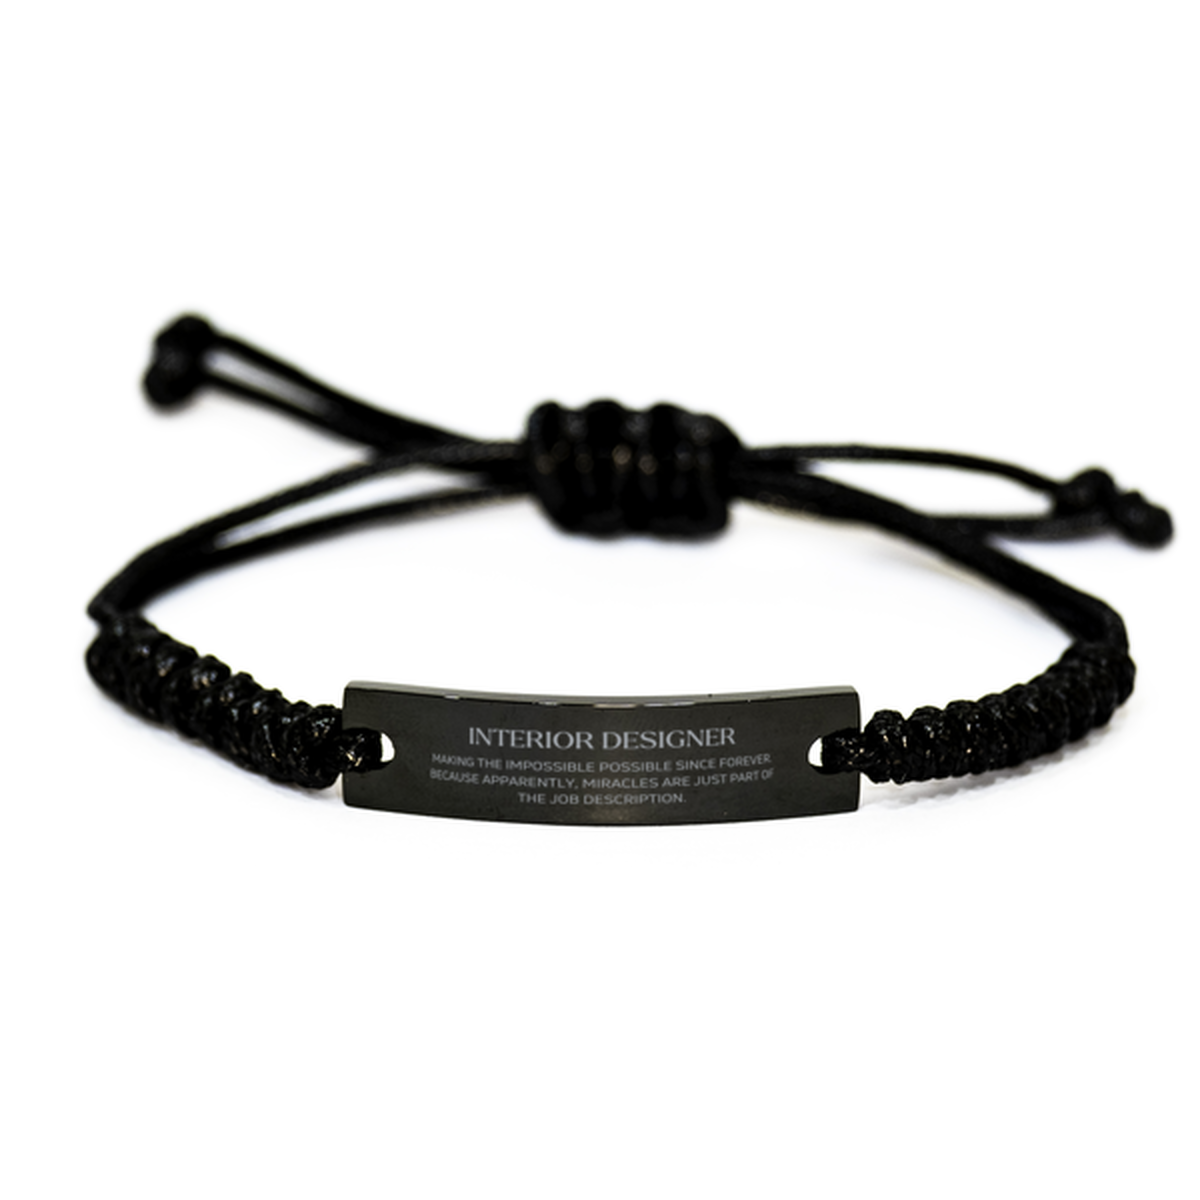 Funny Interior Designer Gifts, Miracles are just part of the job description, Inspirational Birthday Black Rope Bracelet For Interior Designer, Men, Women, Coworkers, Friends, Boss